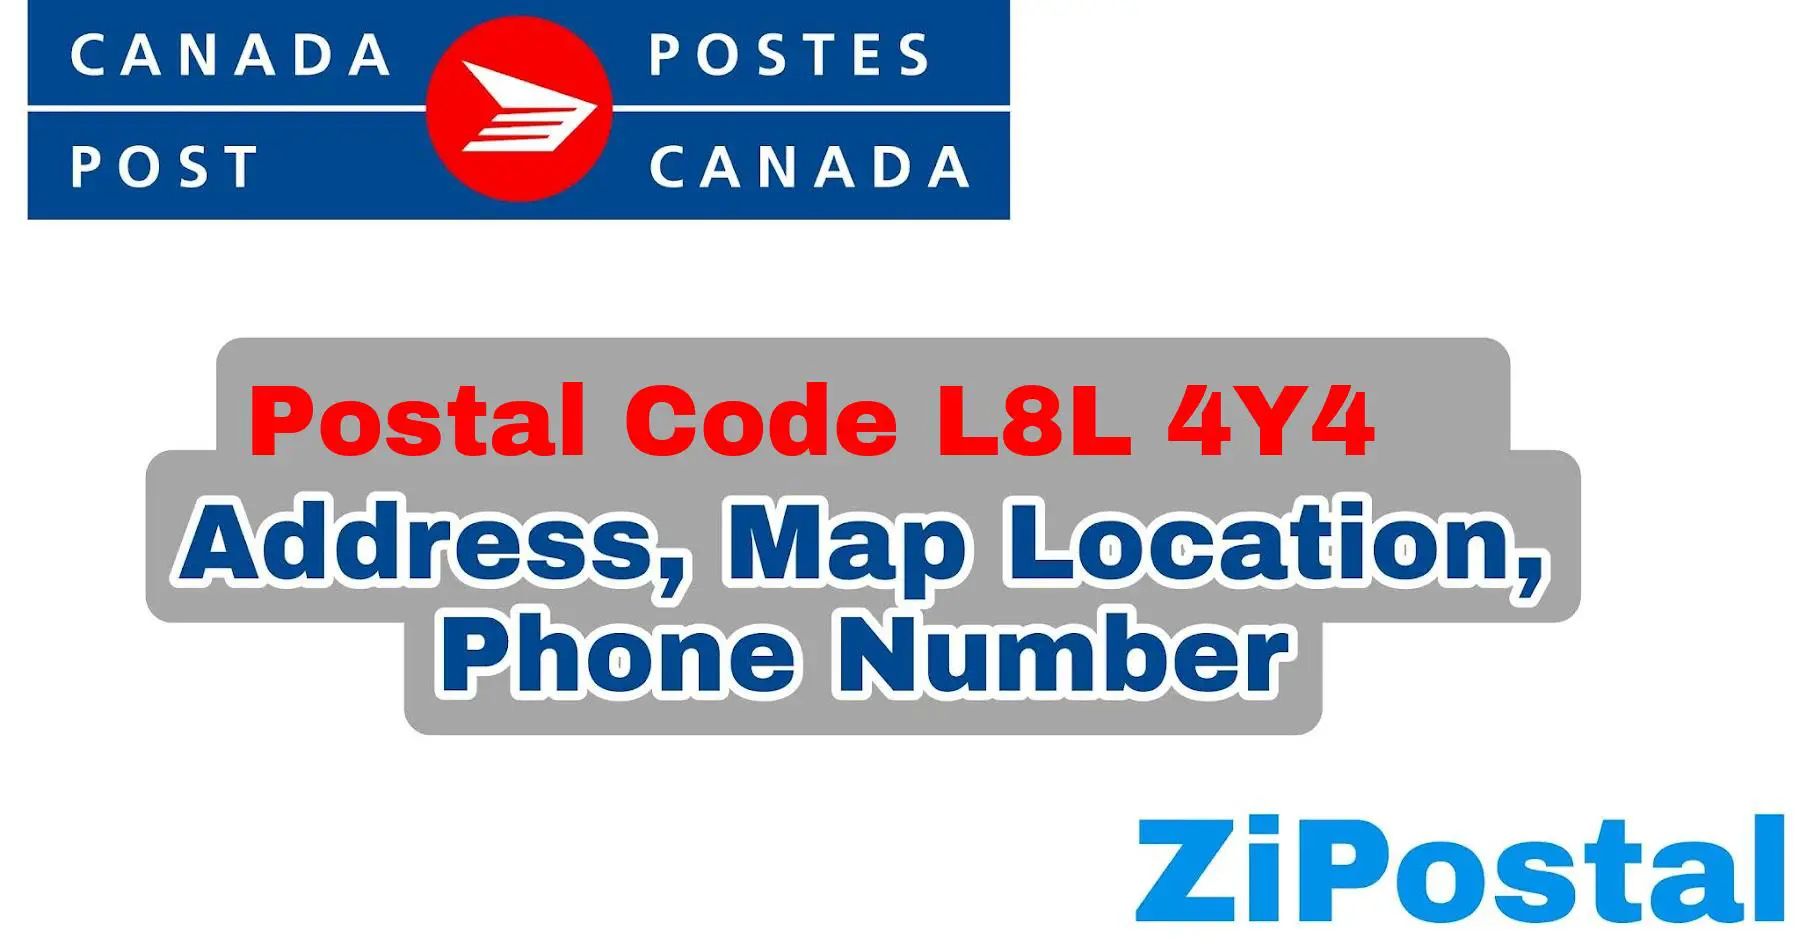 Postal Code L8L 4Y4 Address Map Location and Phone Number